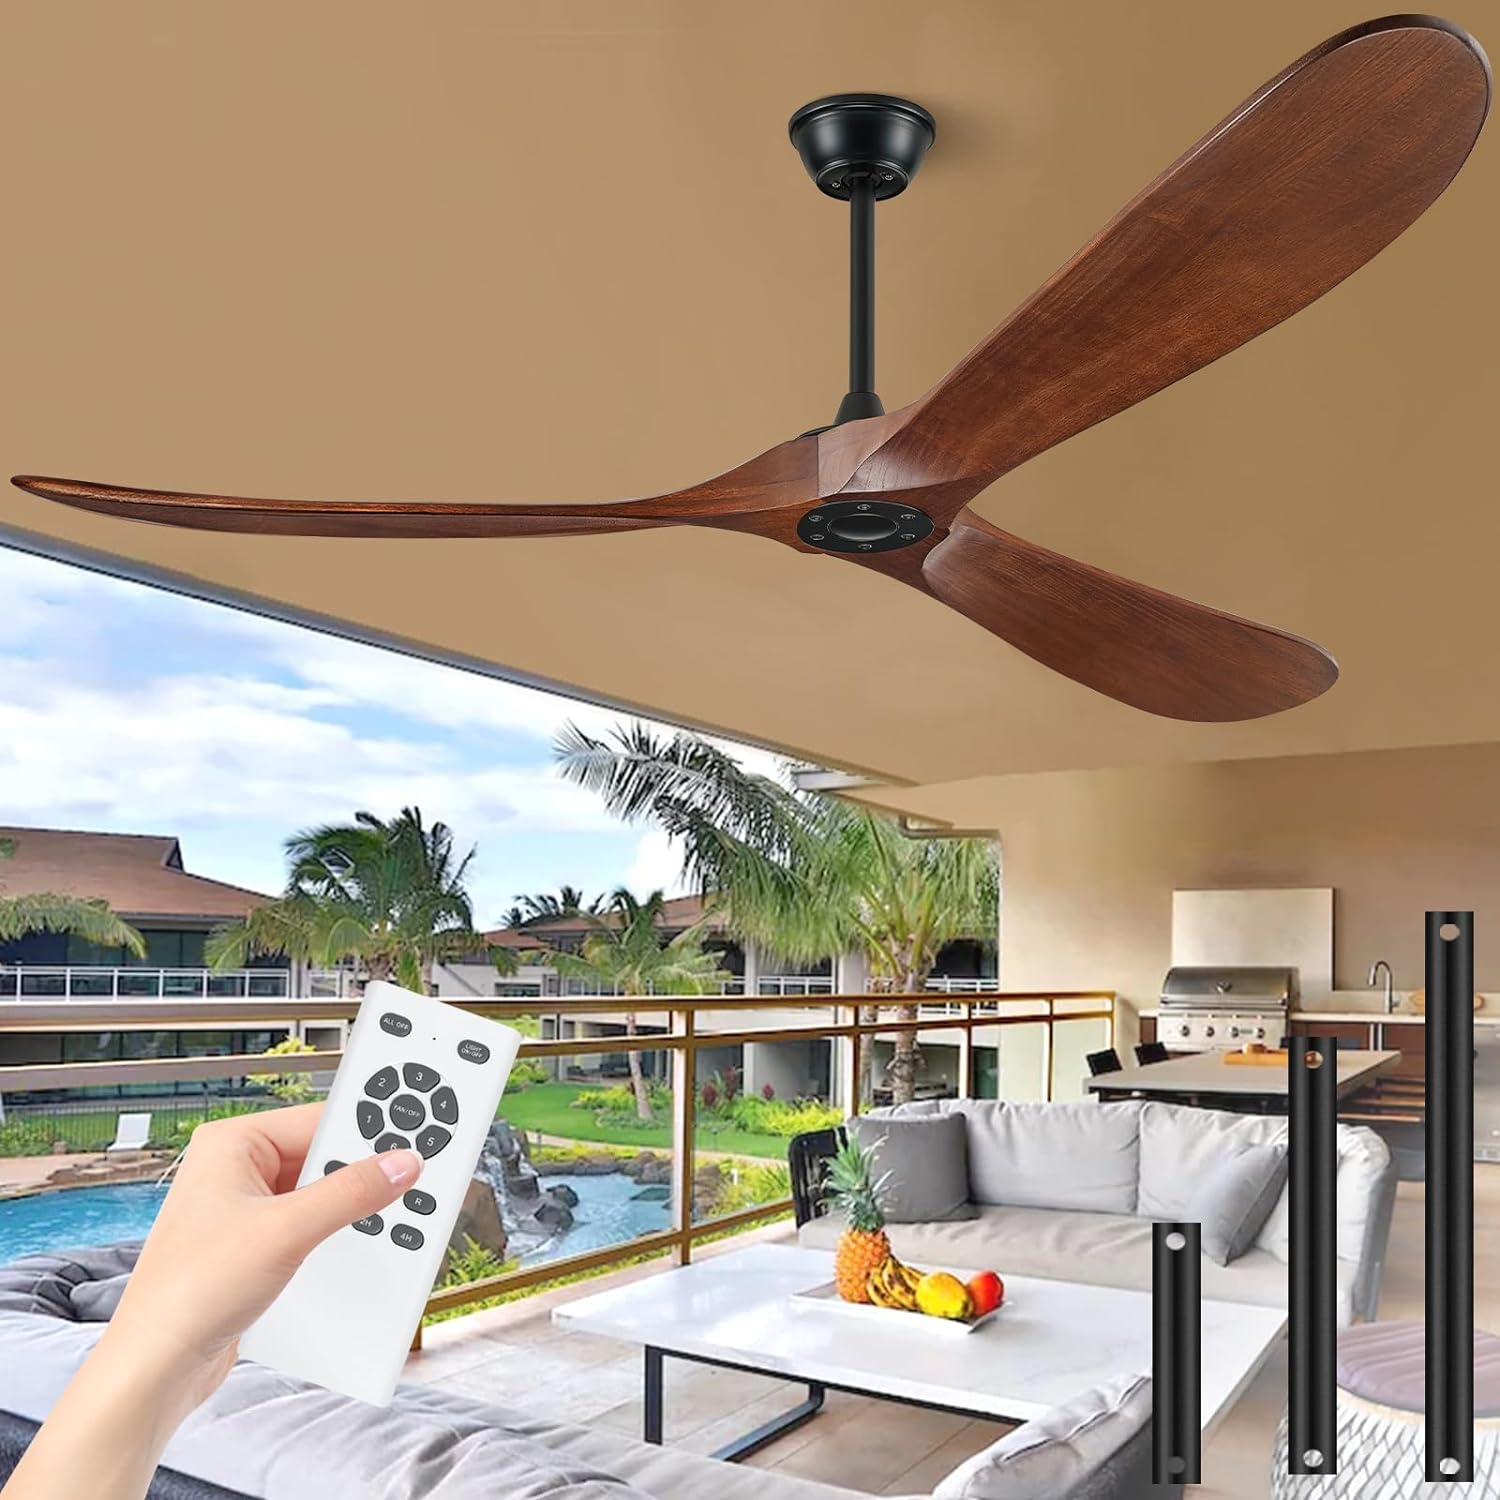 72 Ceiling Fans without Lights, 72 inch Ceiling Fan with Remote, High cfm Quiet Wooden Walnut Ceiling Fans, Large Outside Ceiling Fan no Light, Propeller Outdoor Ceiling Fans for Patios